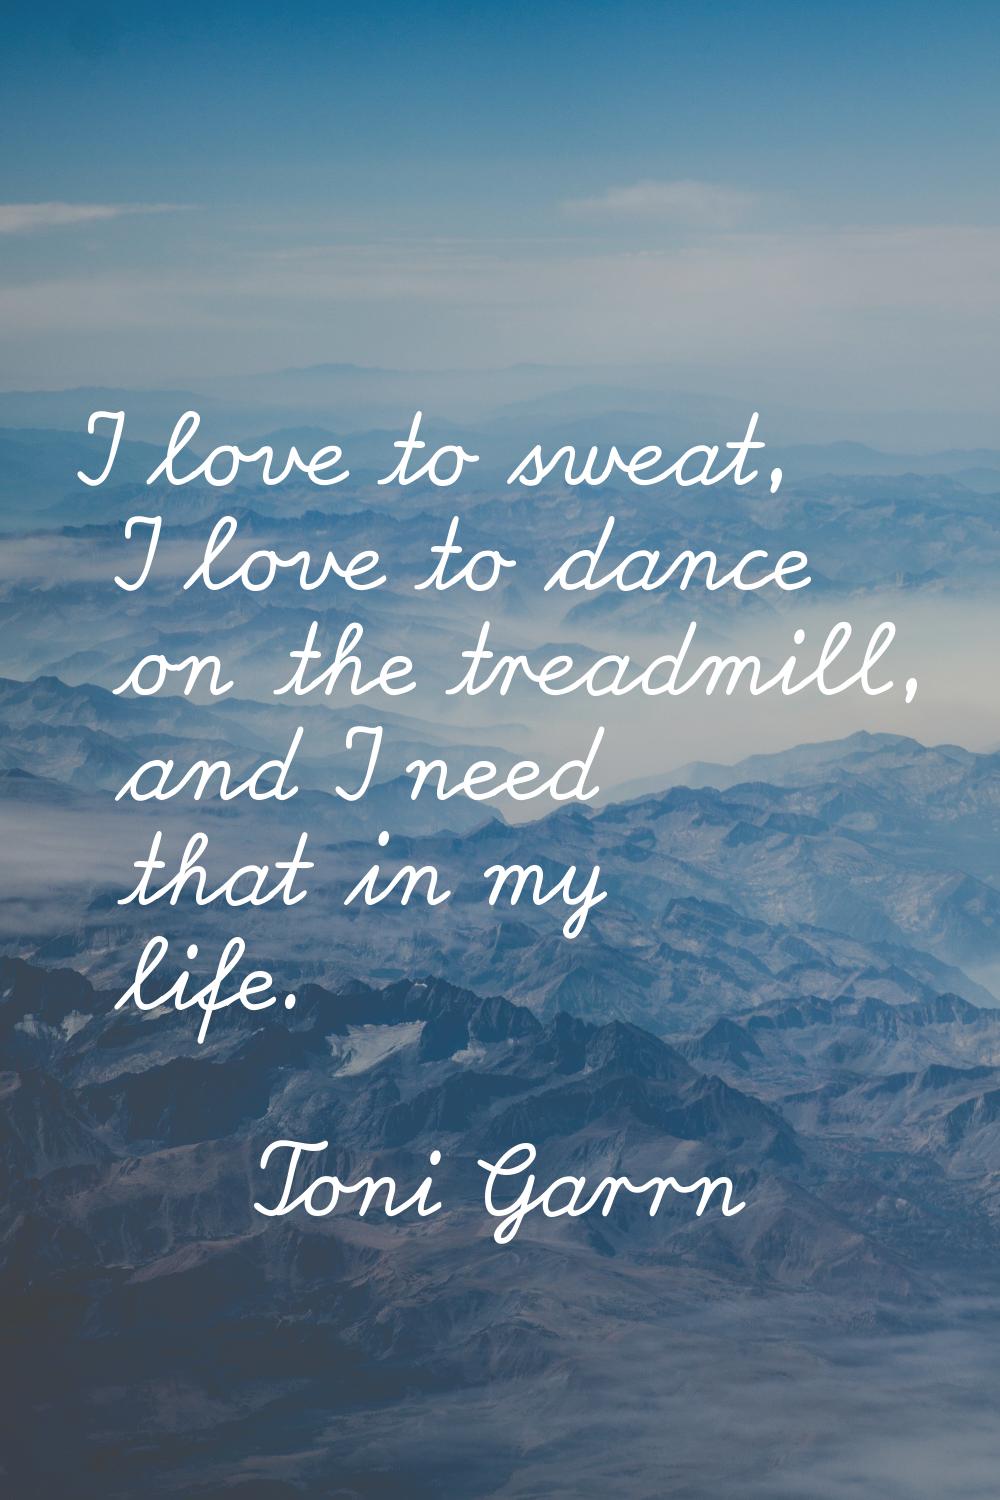 I love to sweat, I love to dance on the treadmill, and I need that in my life.